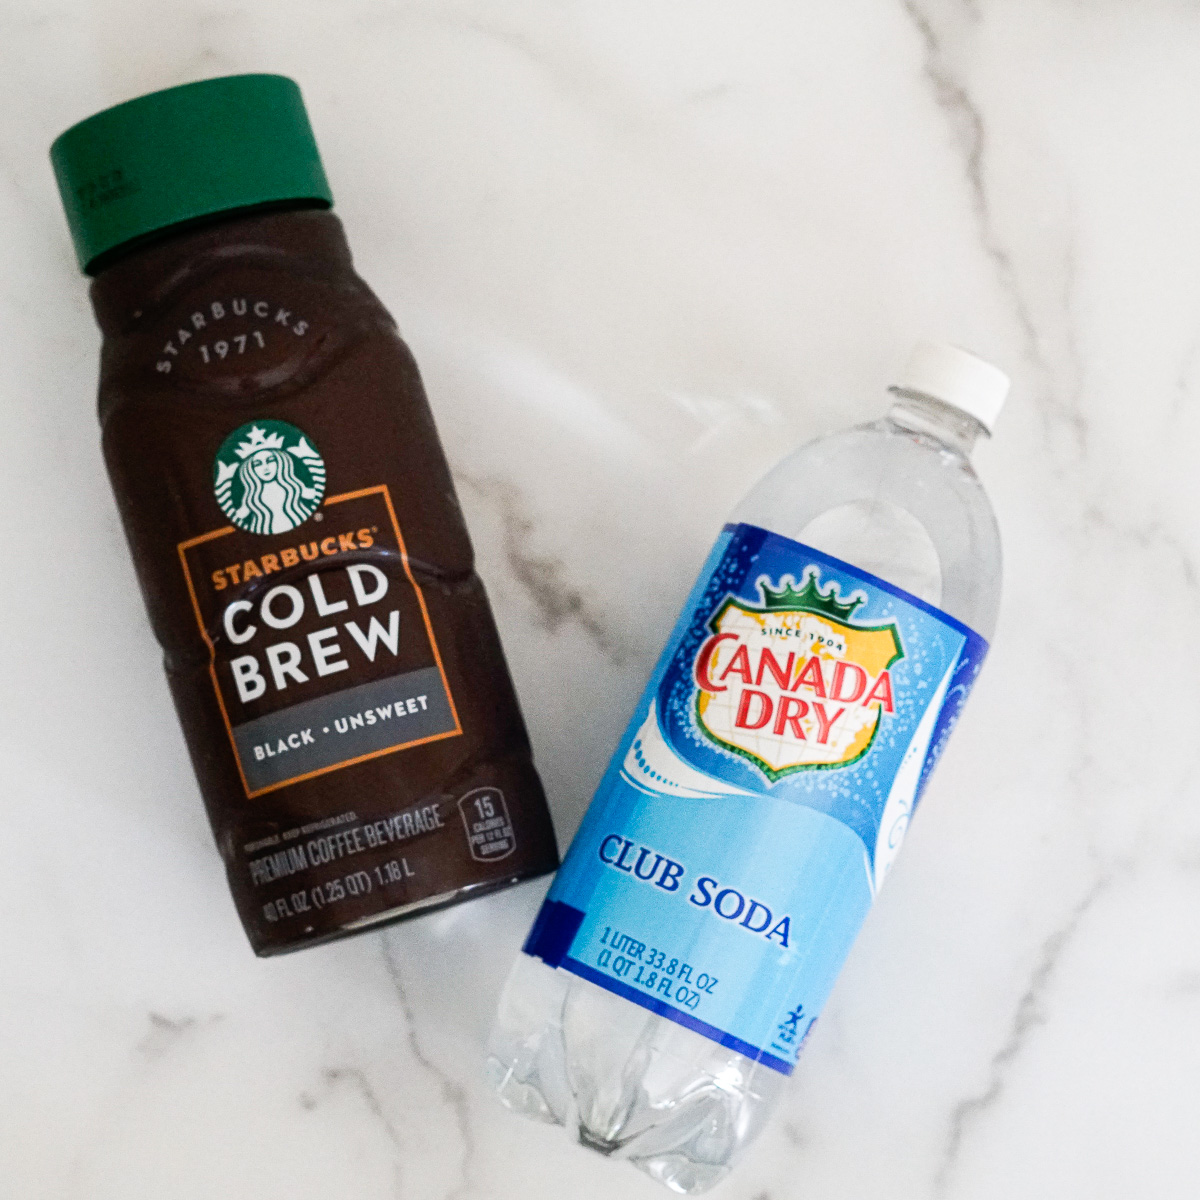 Cold Brew and Club Soda - Ingredients for Iced Coffee Soda